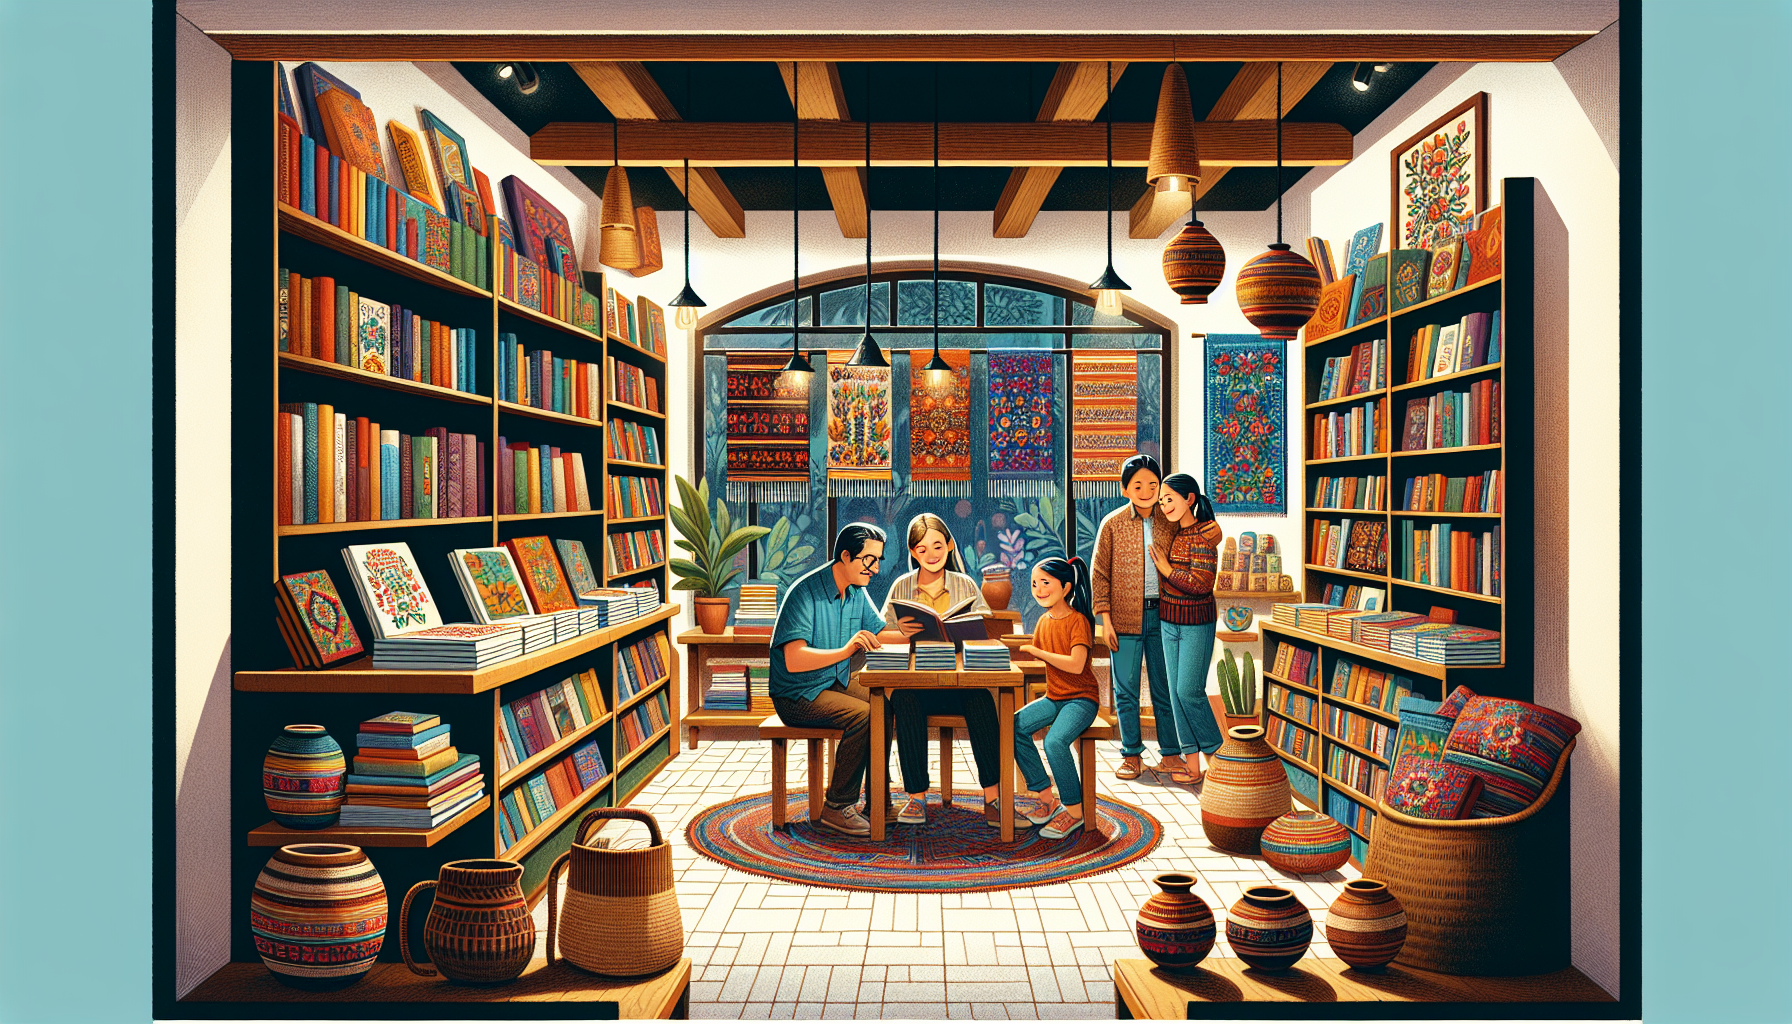 Cozy Christian bookstore in Guatemala with shelves full of books, warm lighting, and a local Guatemalan family browsing through the selection, with traditional textiles and pottery decorating the inte